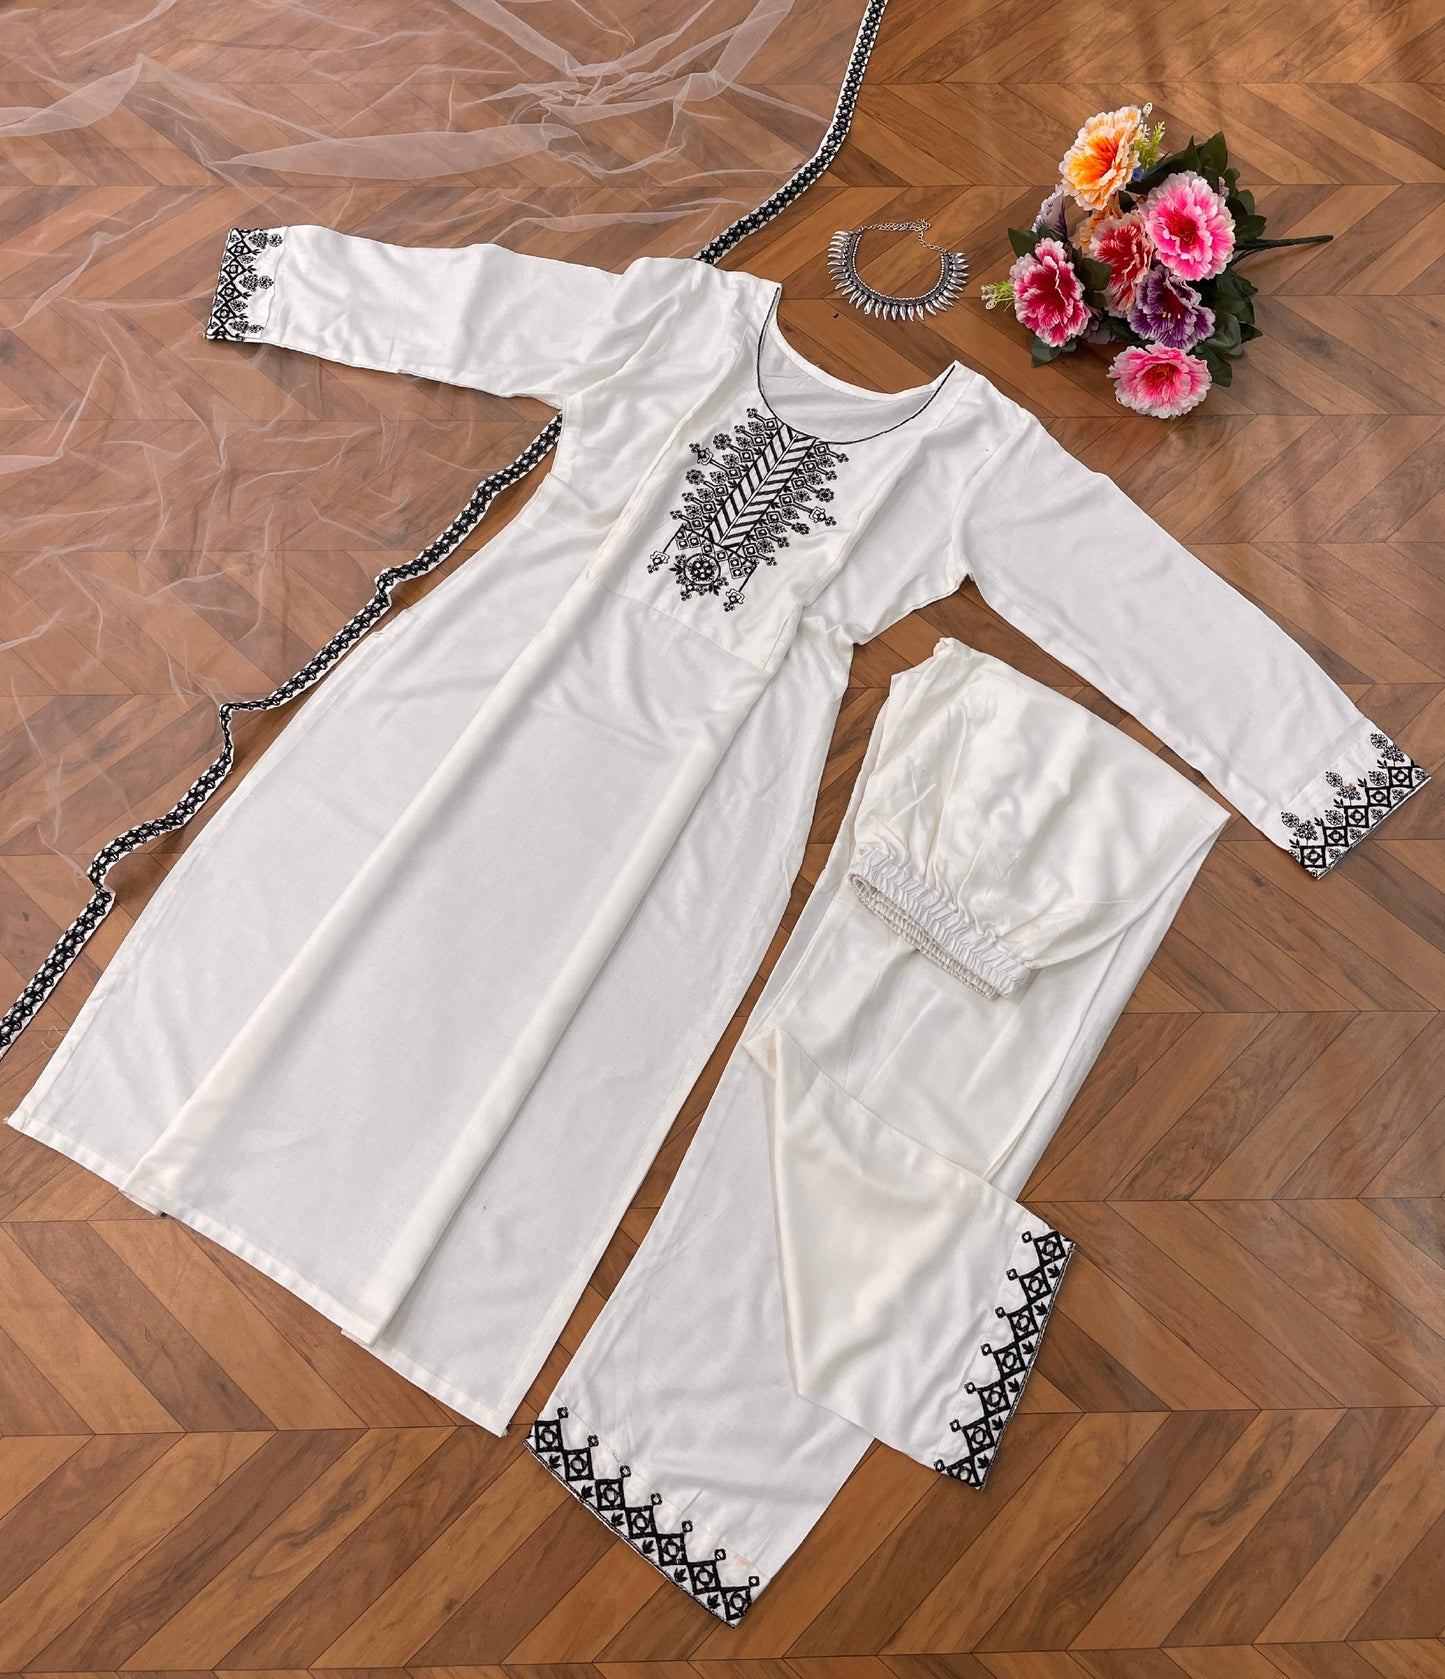 "Stylish Rayon Cotton Kurta Set with Fancy Thread Work - Fully Stitched and Ready to Wear | Perfect for Any Occasion | Multiple Sizes Available"